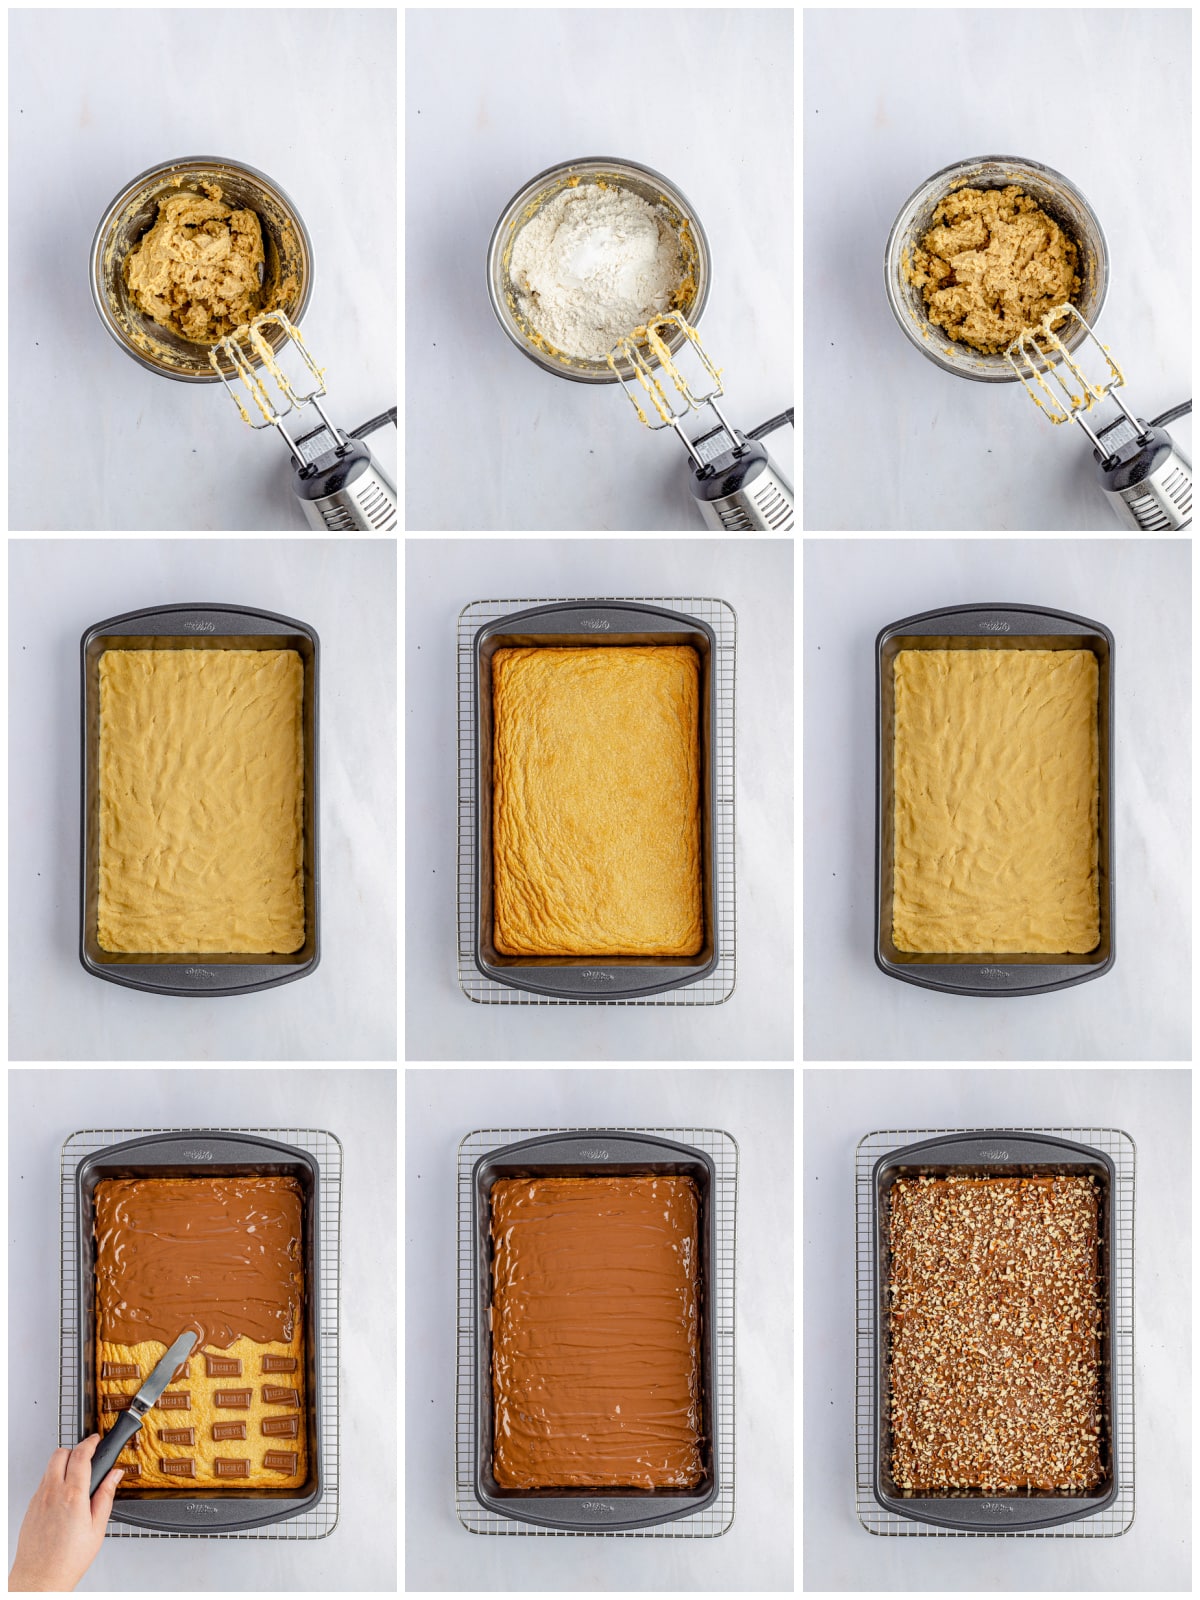 Step by step photos on how to make Chocolate Toffee Pecan Bars.